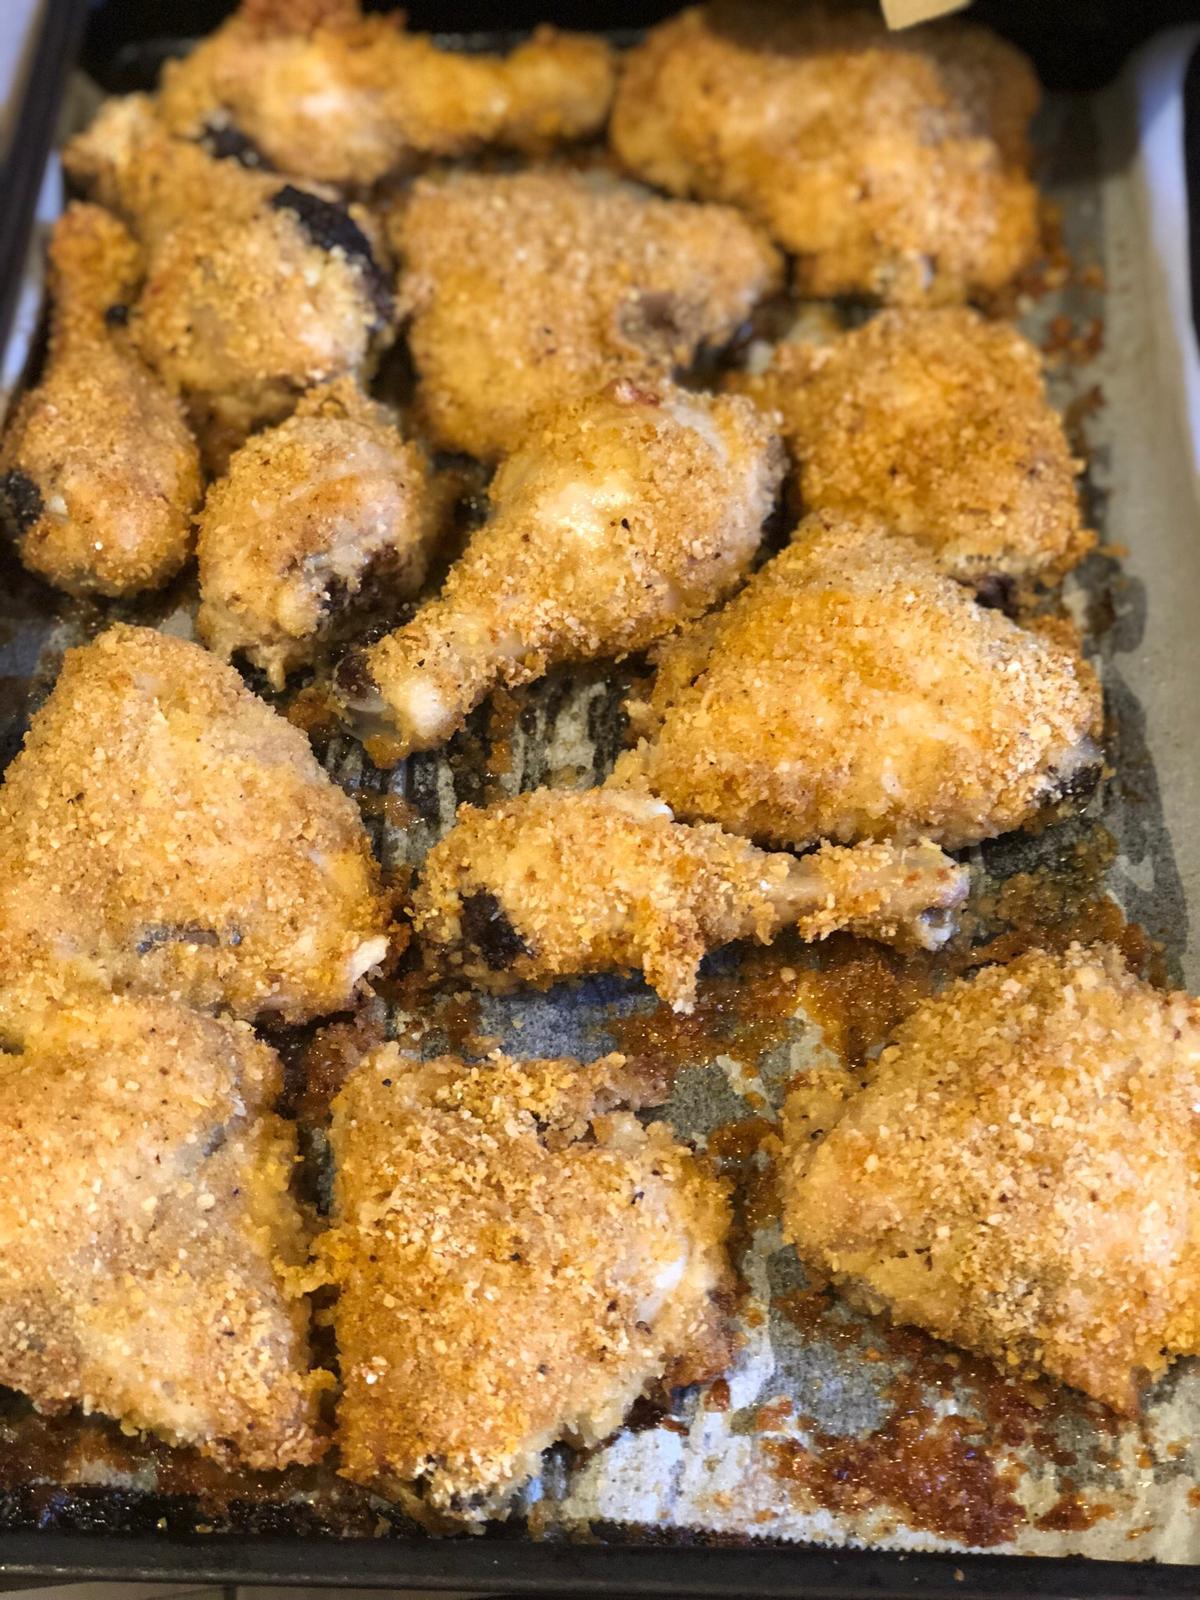 Baked “Fried” Chicken